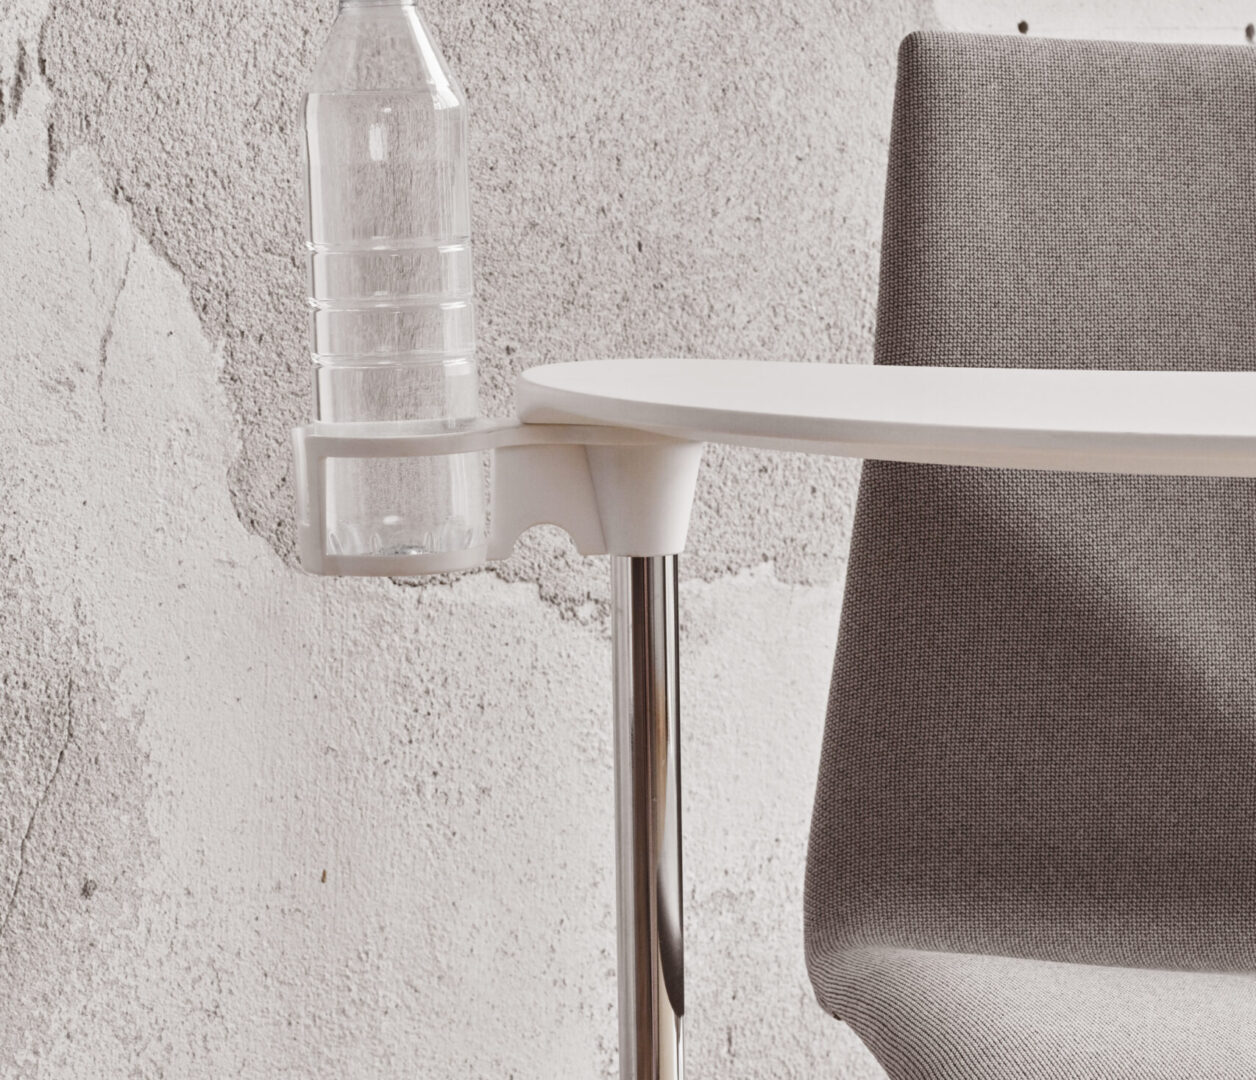 OCEE&FOUR – Chairs – FourCast 2 Lounge – Details Image 2